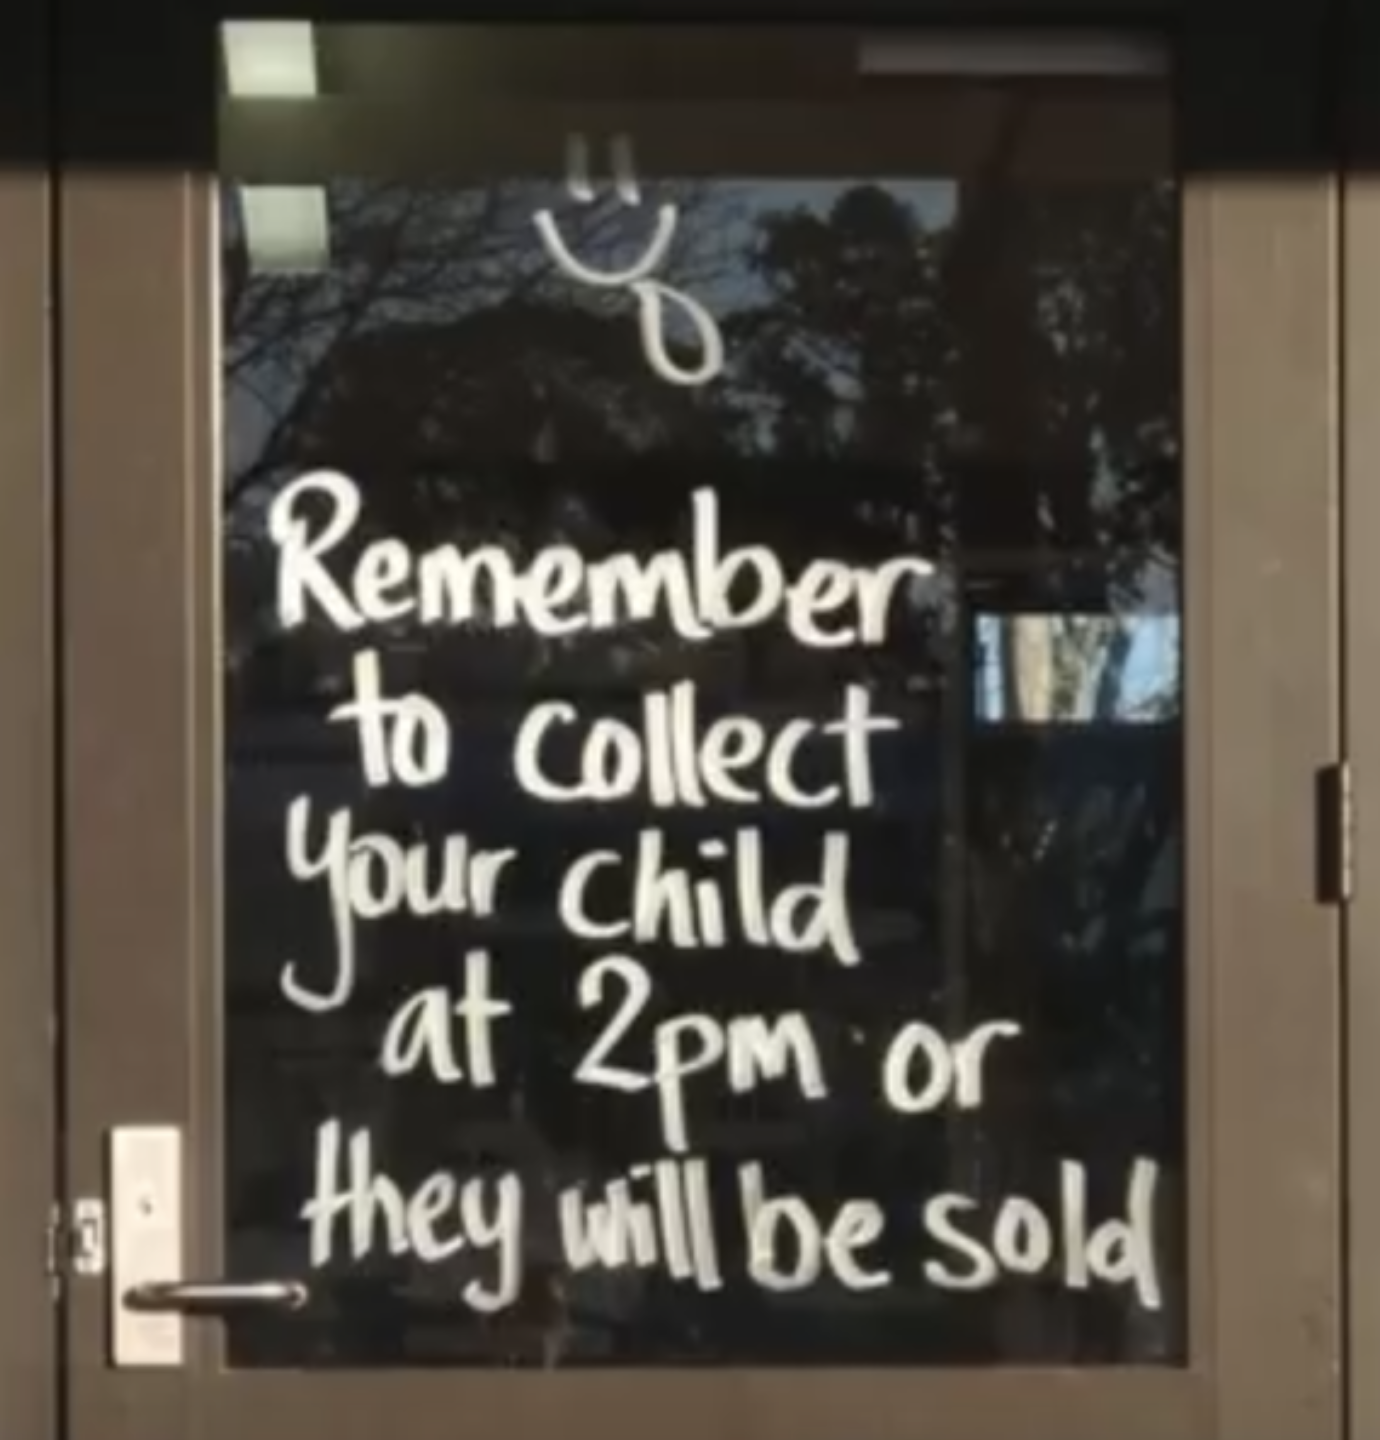 signage - Remember to collect 1032 Your child at 2pm or they will be sold